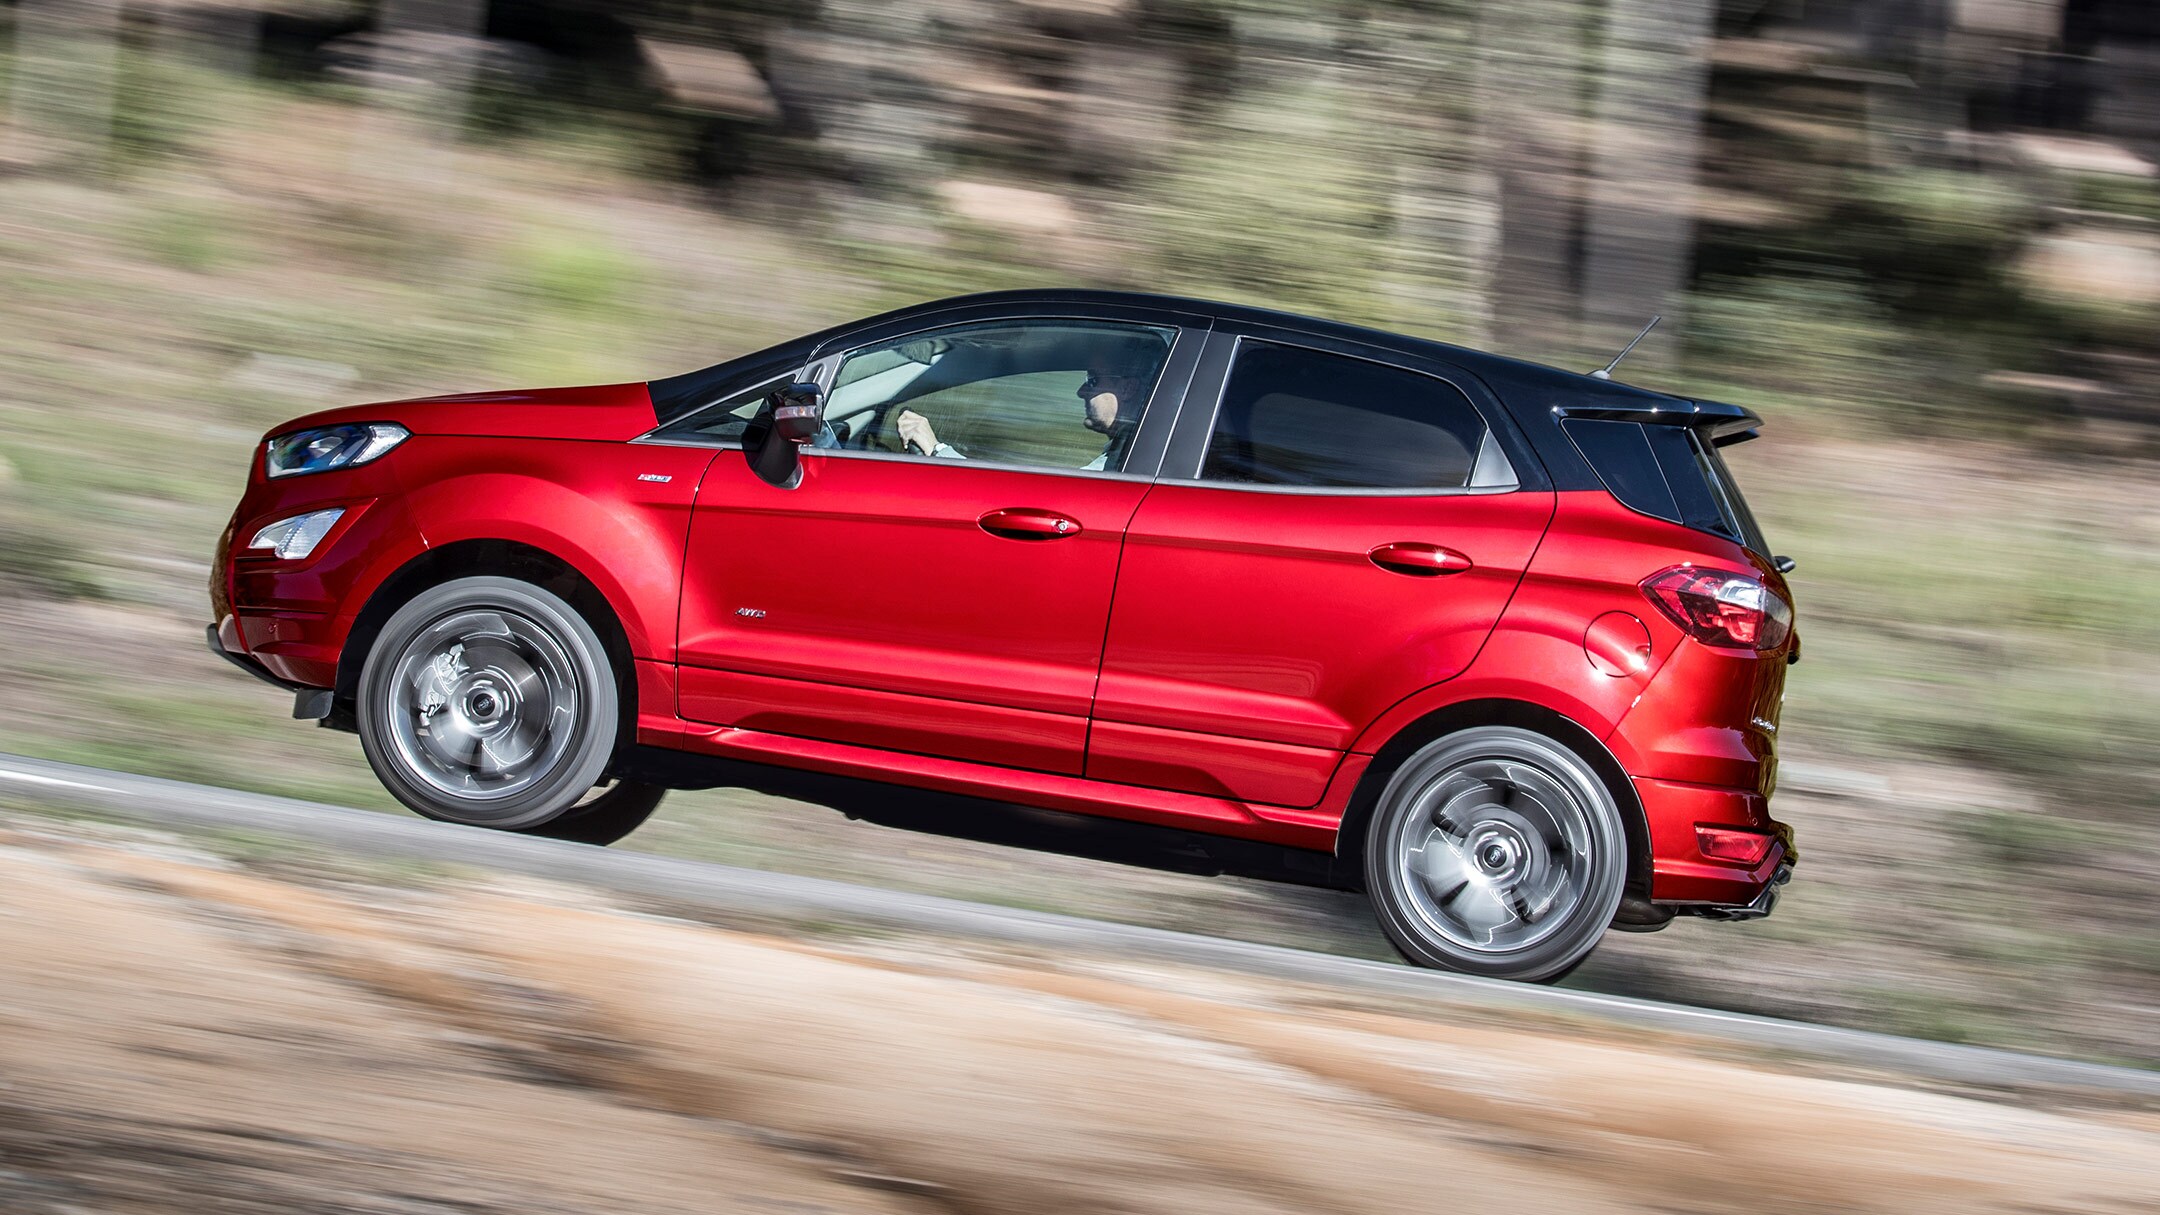 Red Ford EcoSport driving upwards